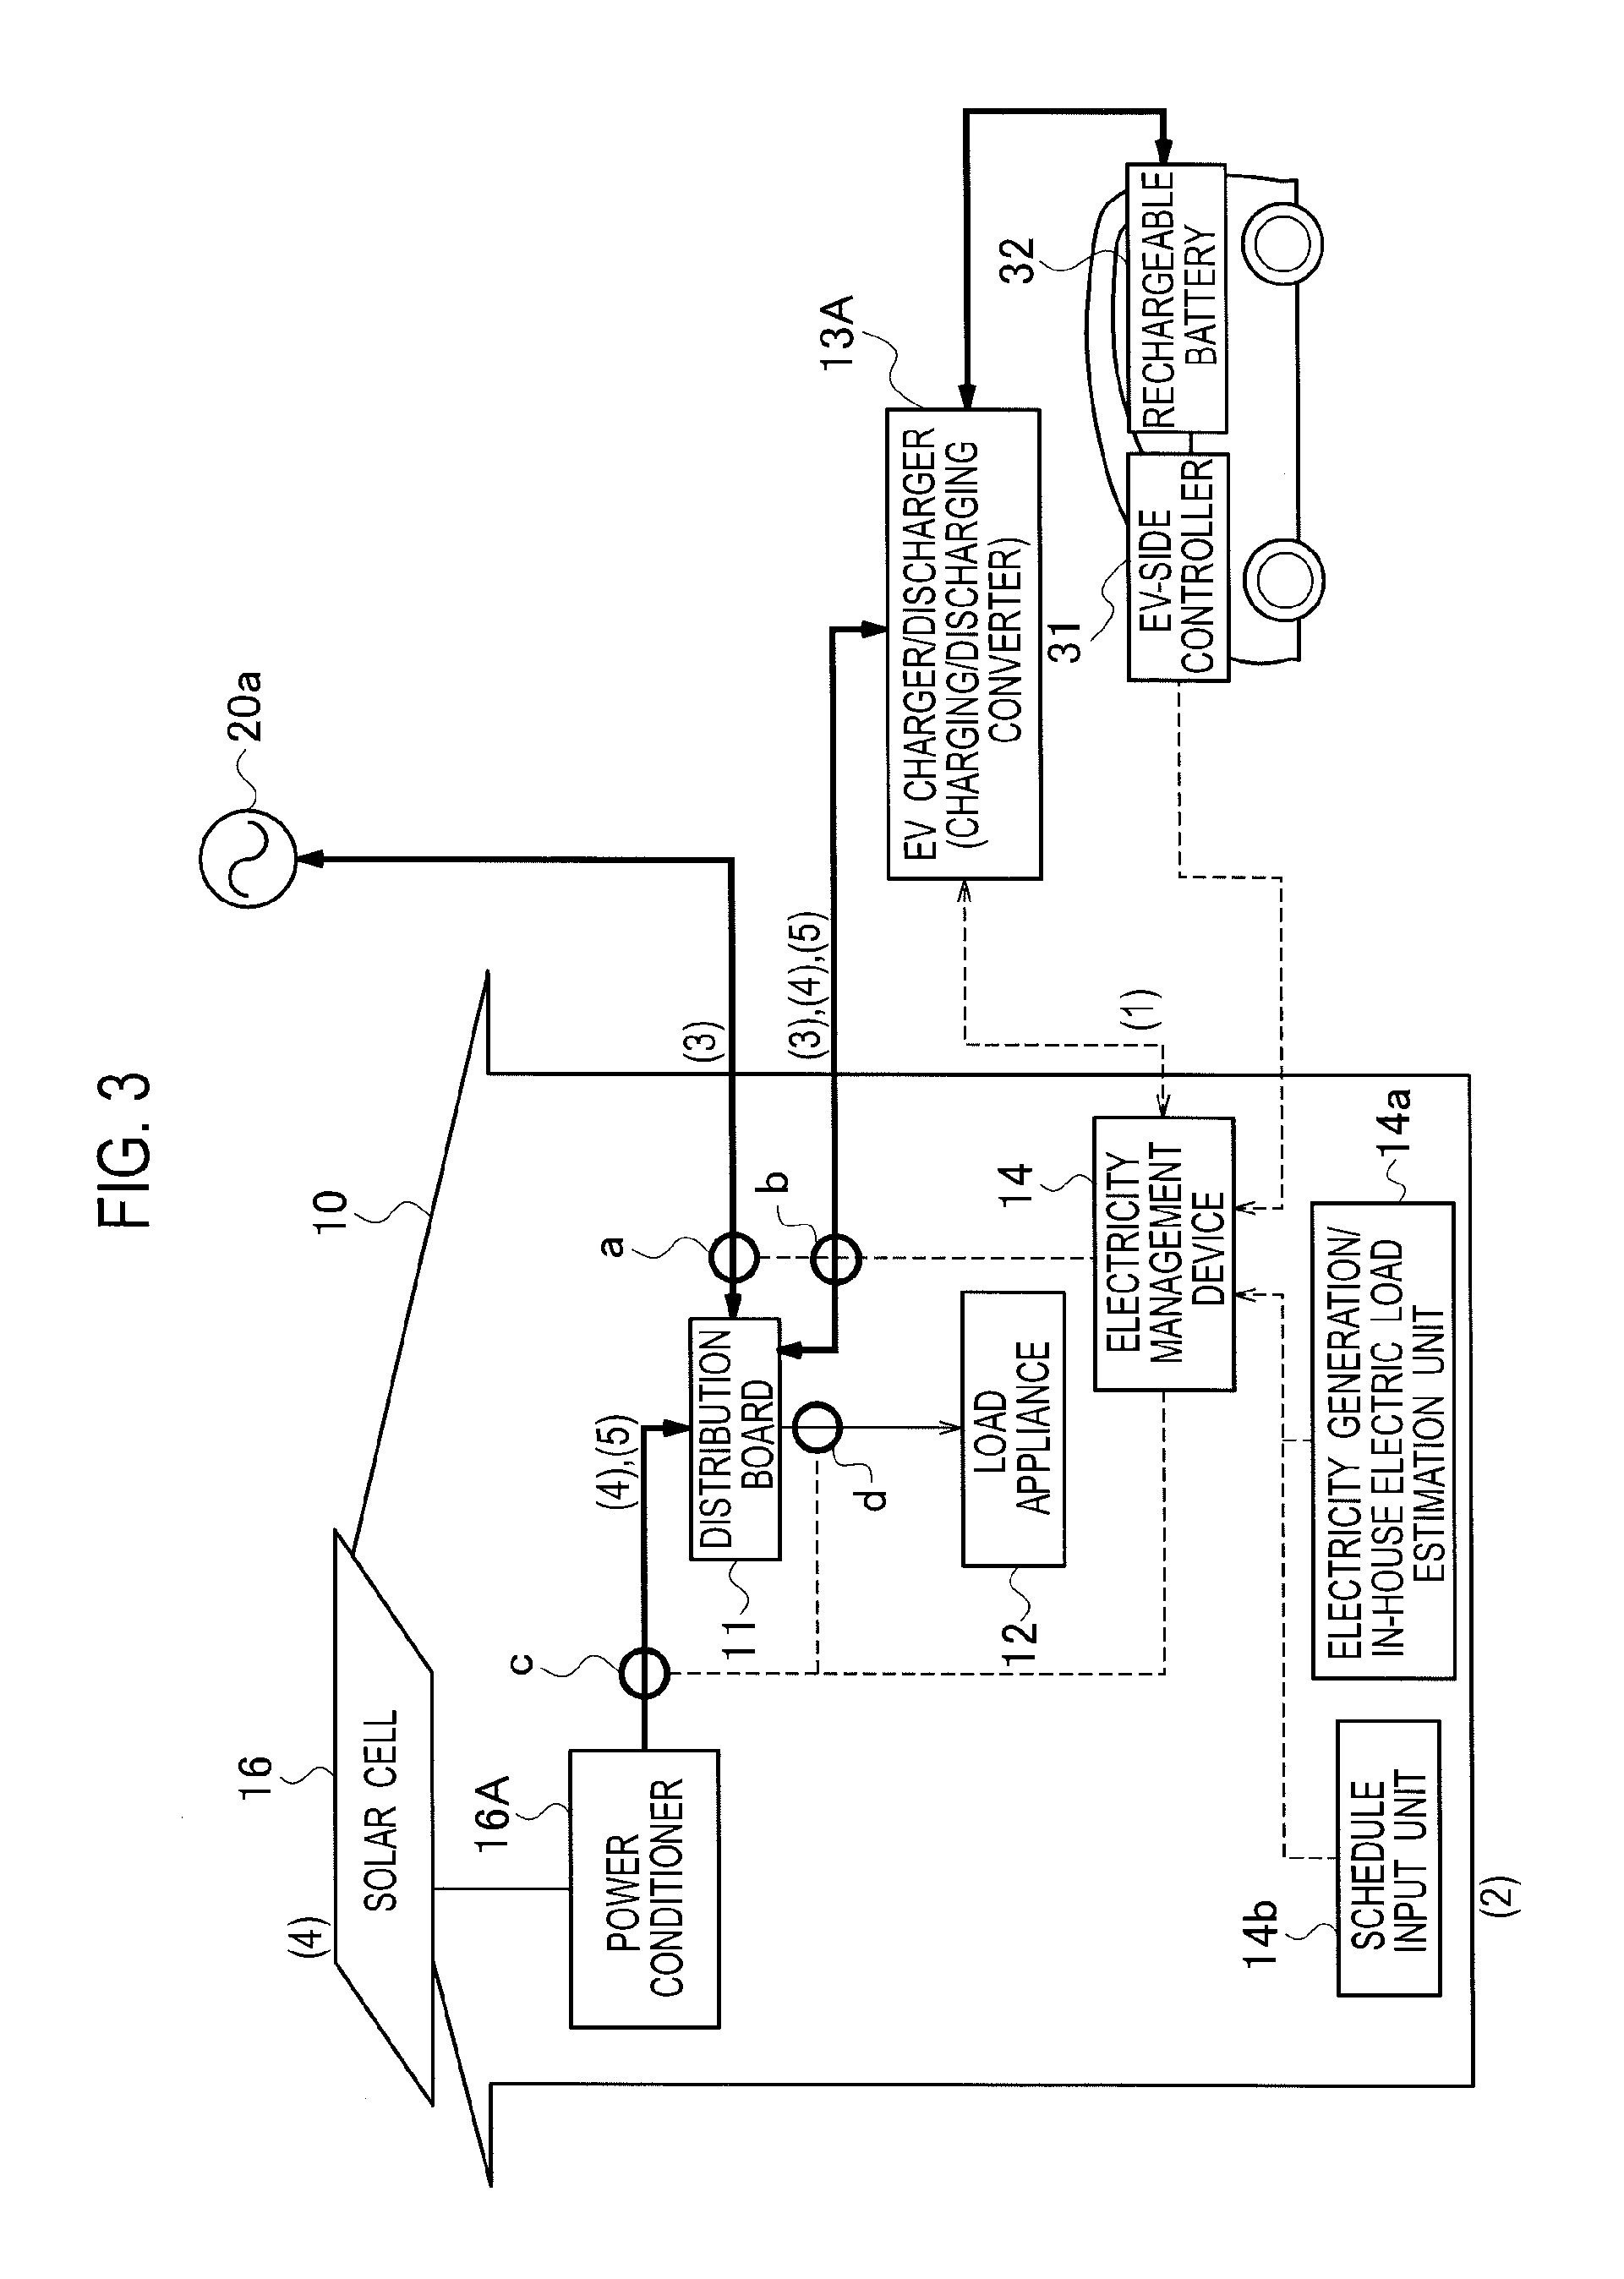 Electricity management device, electricity management program, and electricity distribution system